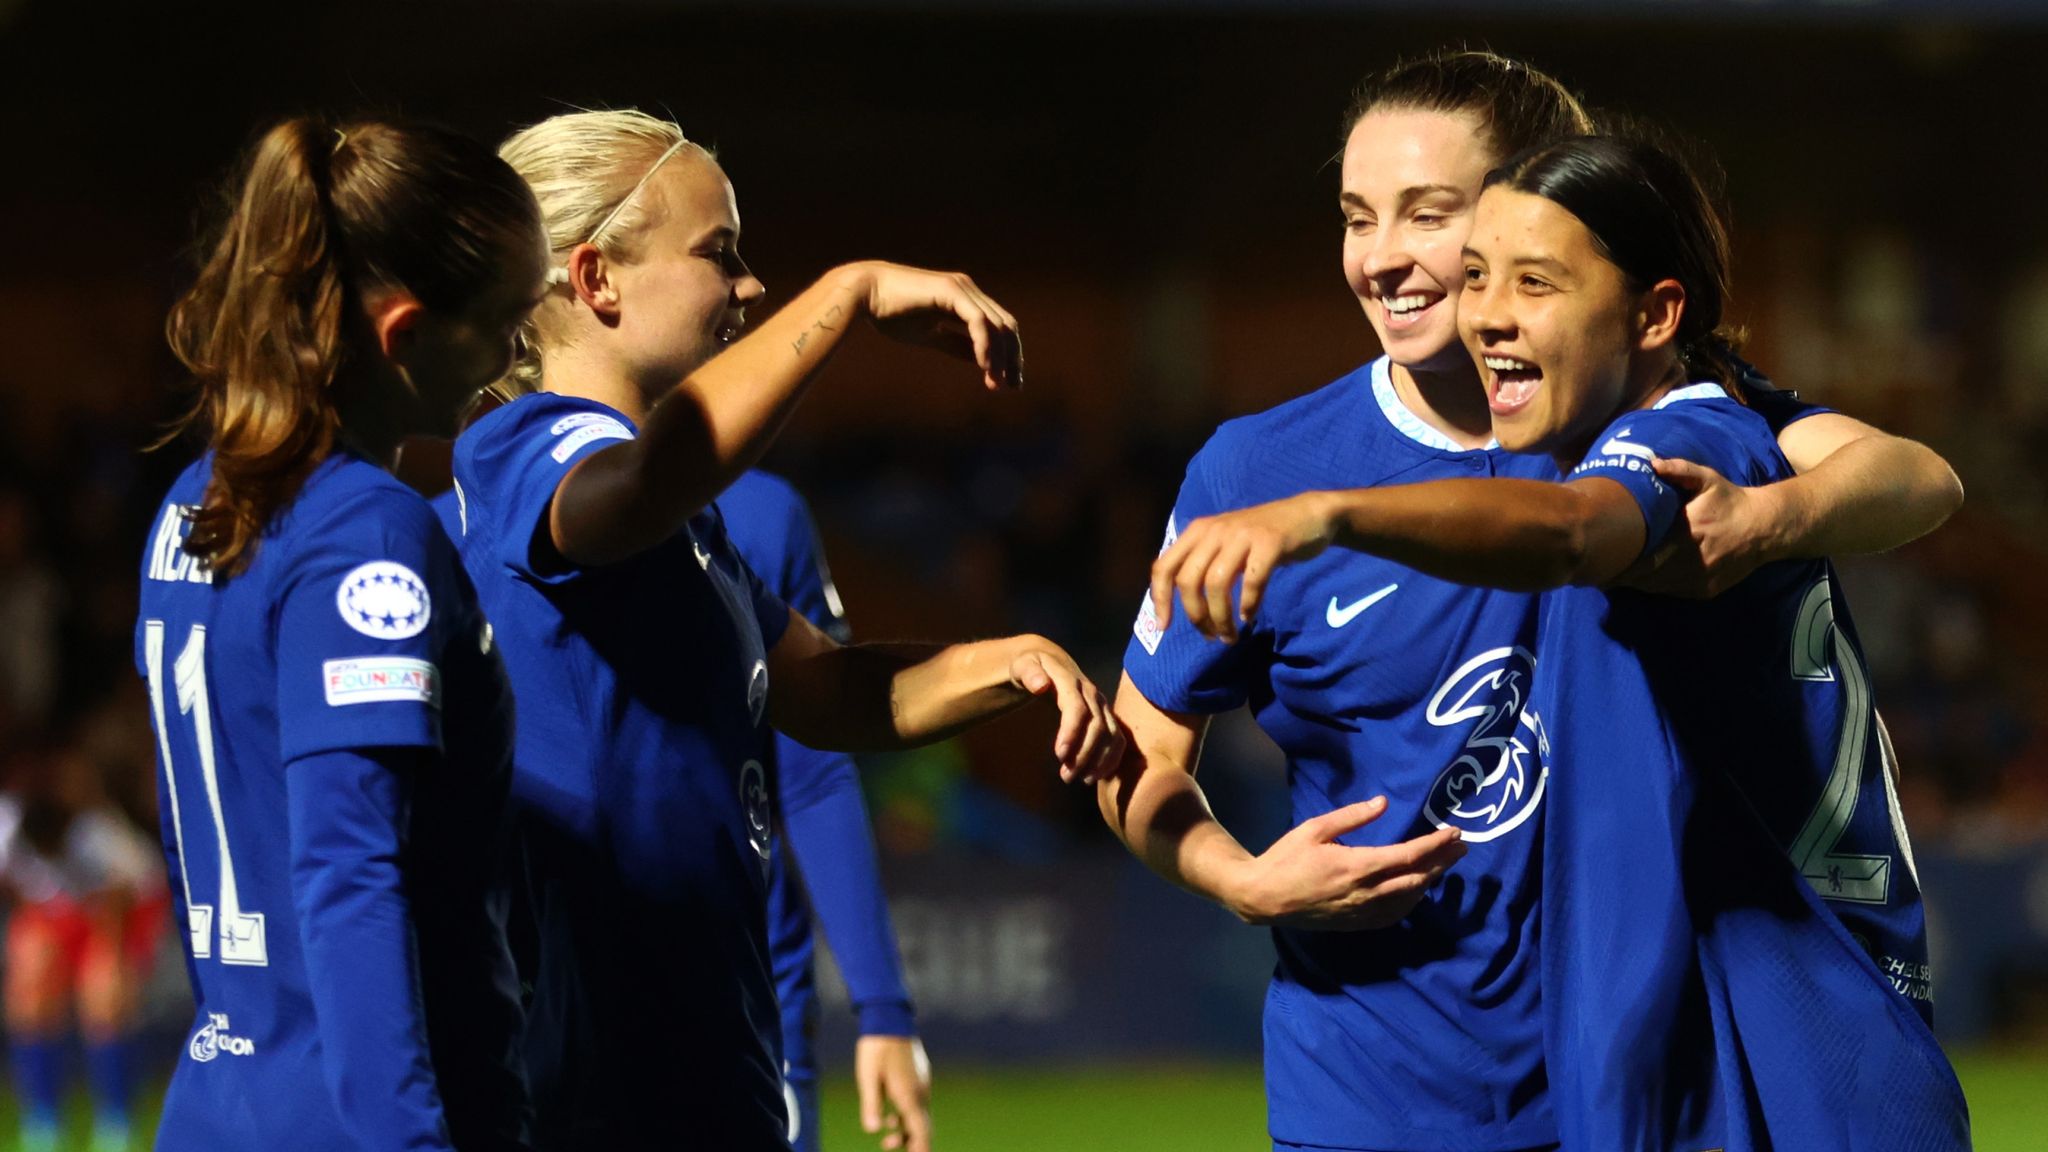 Chelsea 8-0 Vllaznia Sam Kerr scores four and Pernille Harder hits hat-trick in emphatic Blues win Football News Sky Sports